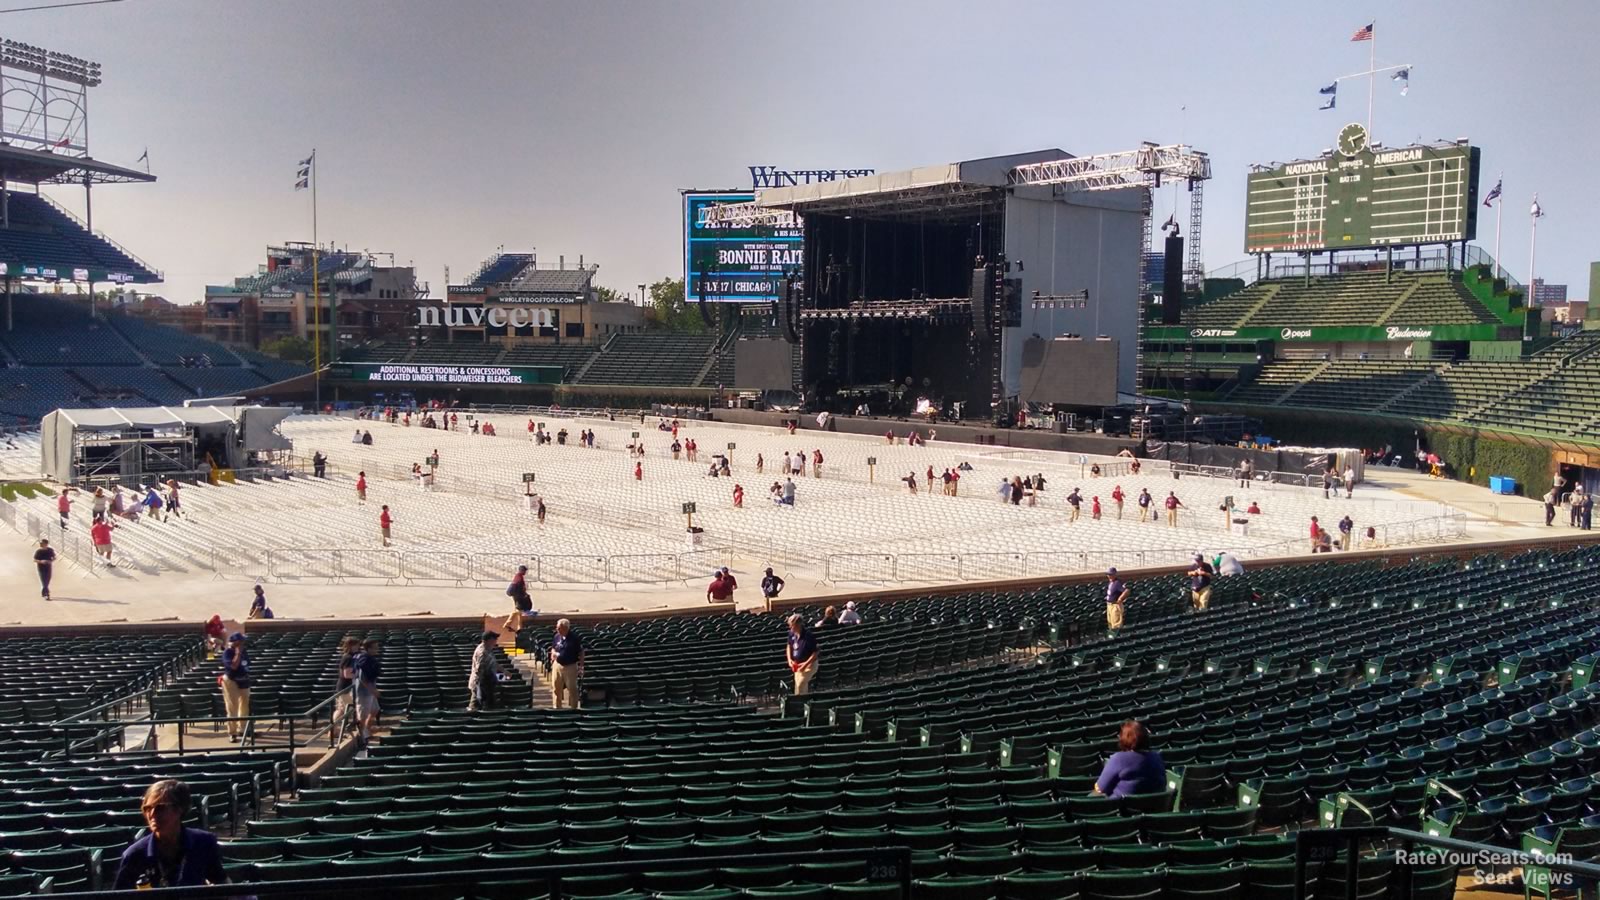 section 228, row 7 seat view  for concert - wrigley field